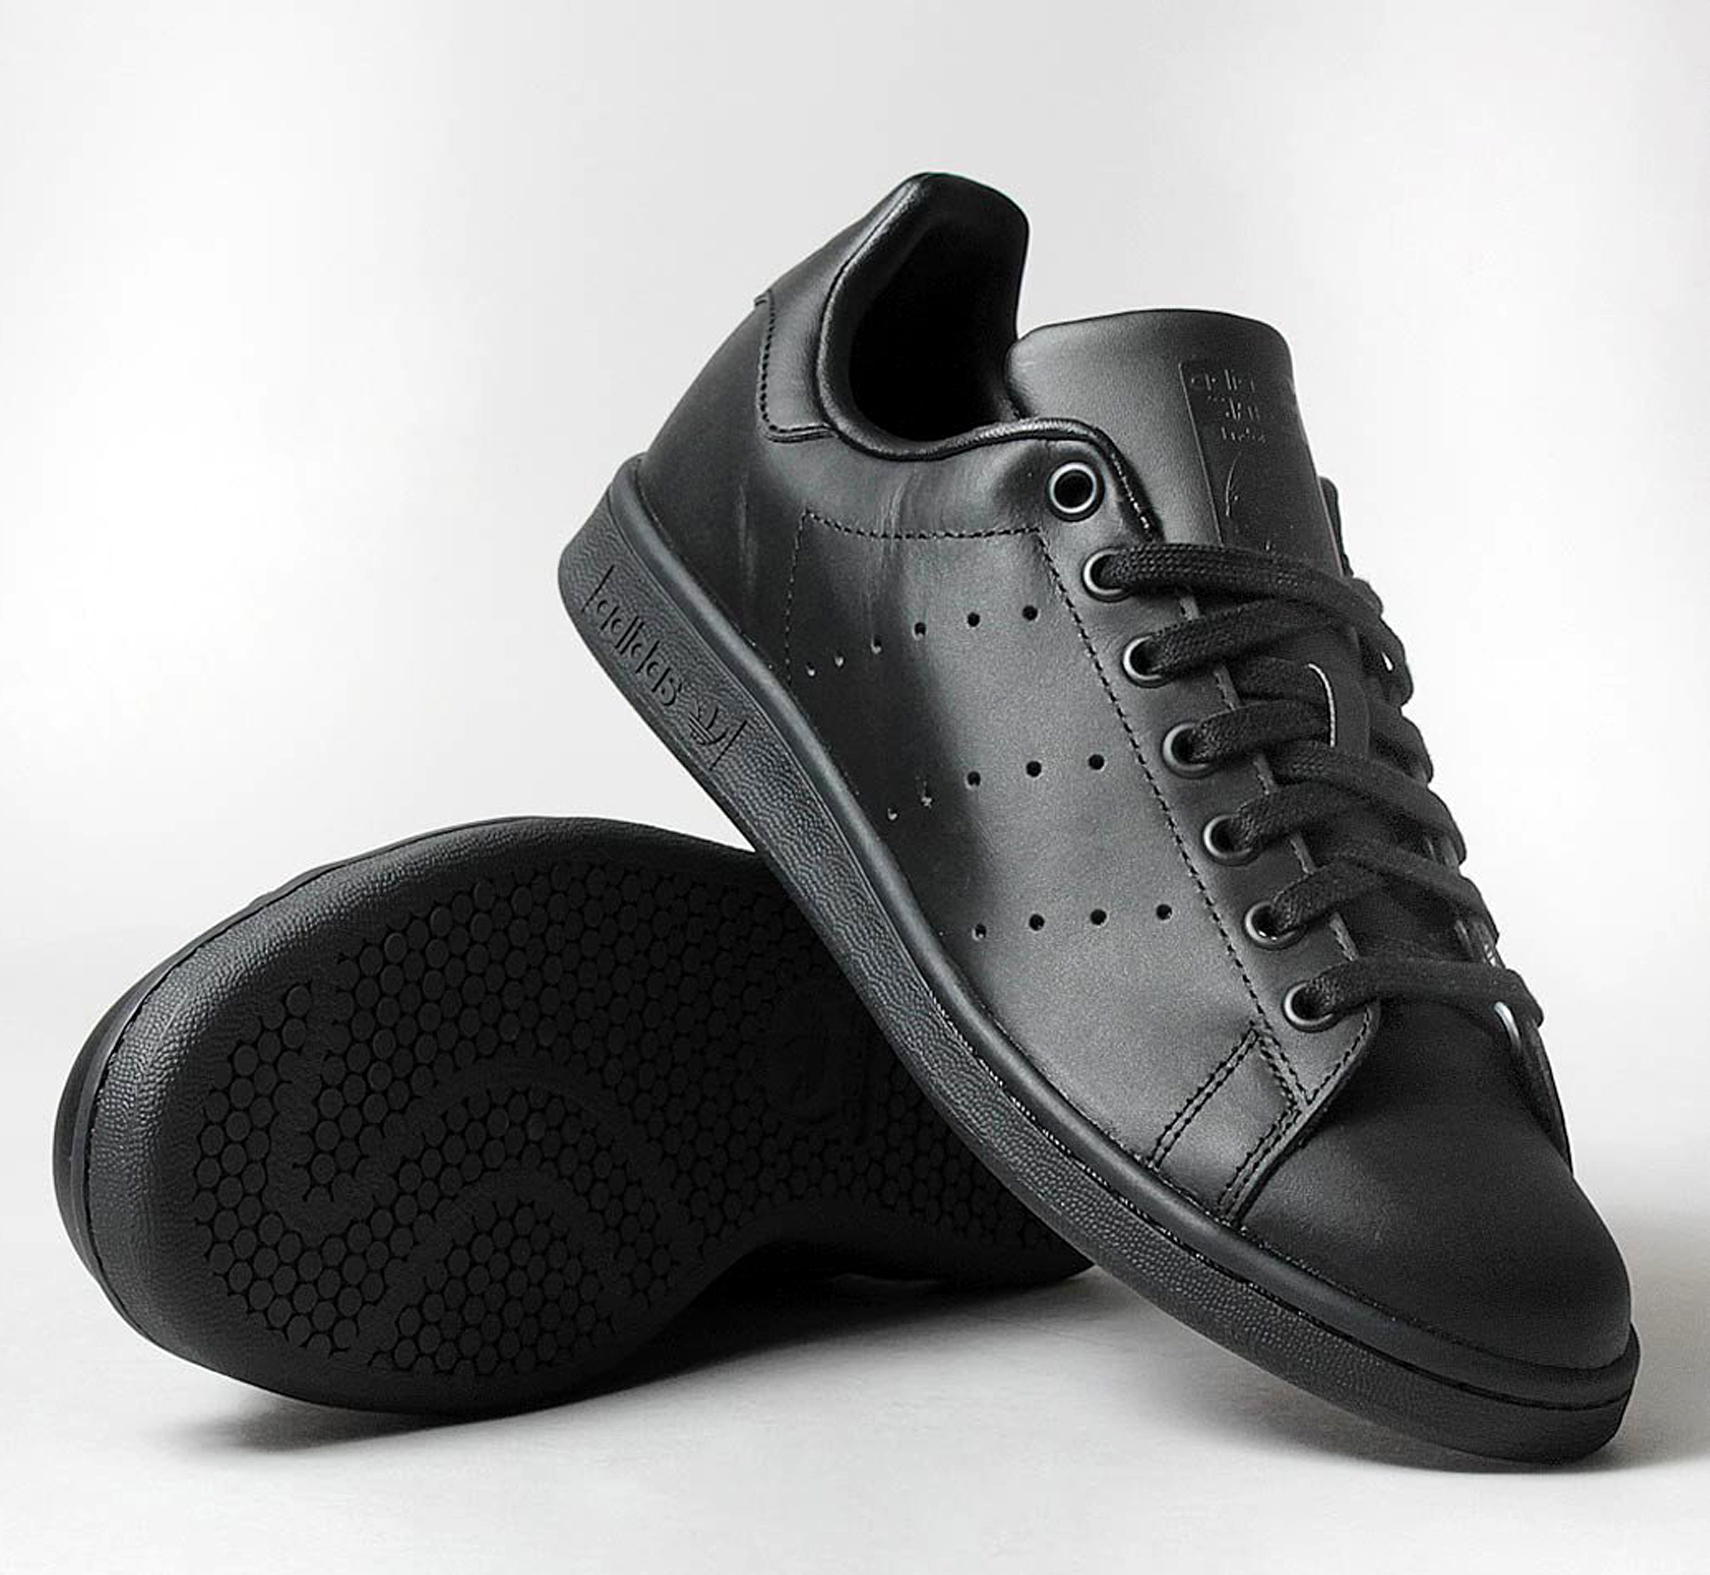 BANNED: School outlaws Stan Smith shoes 